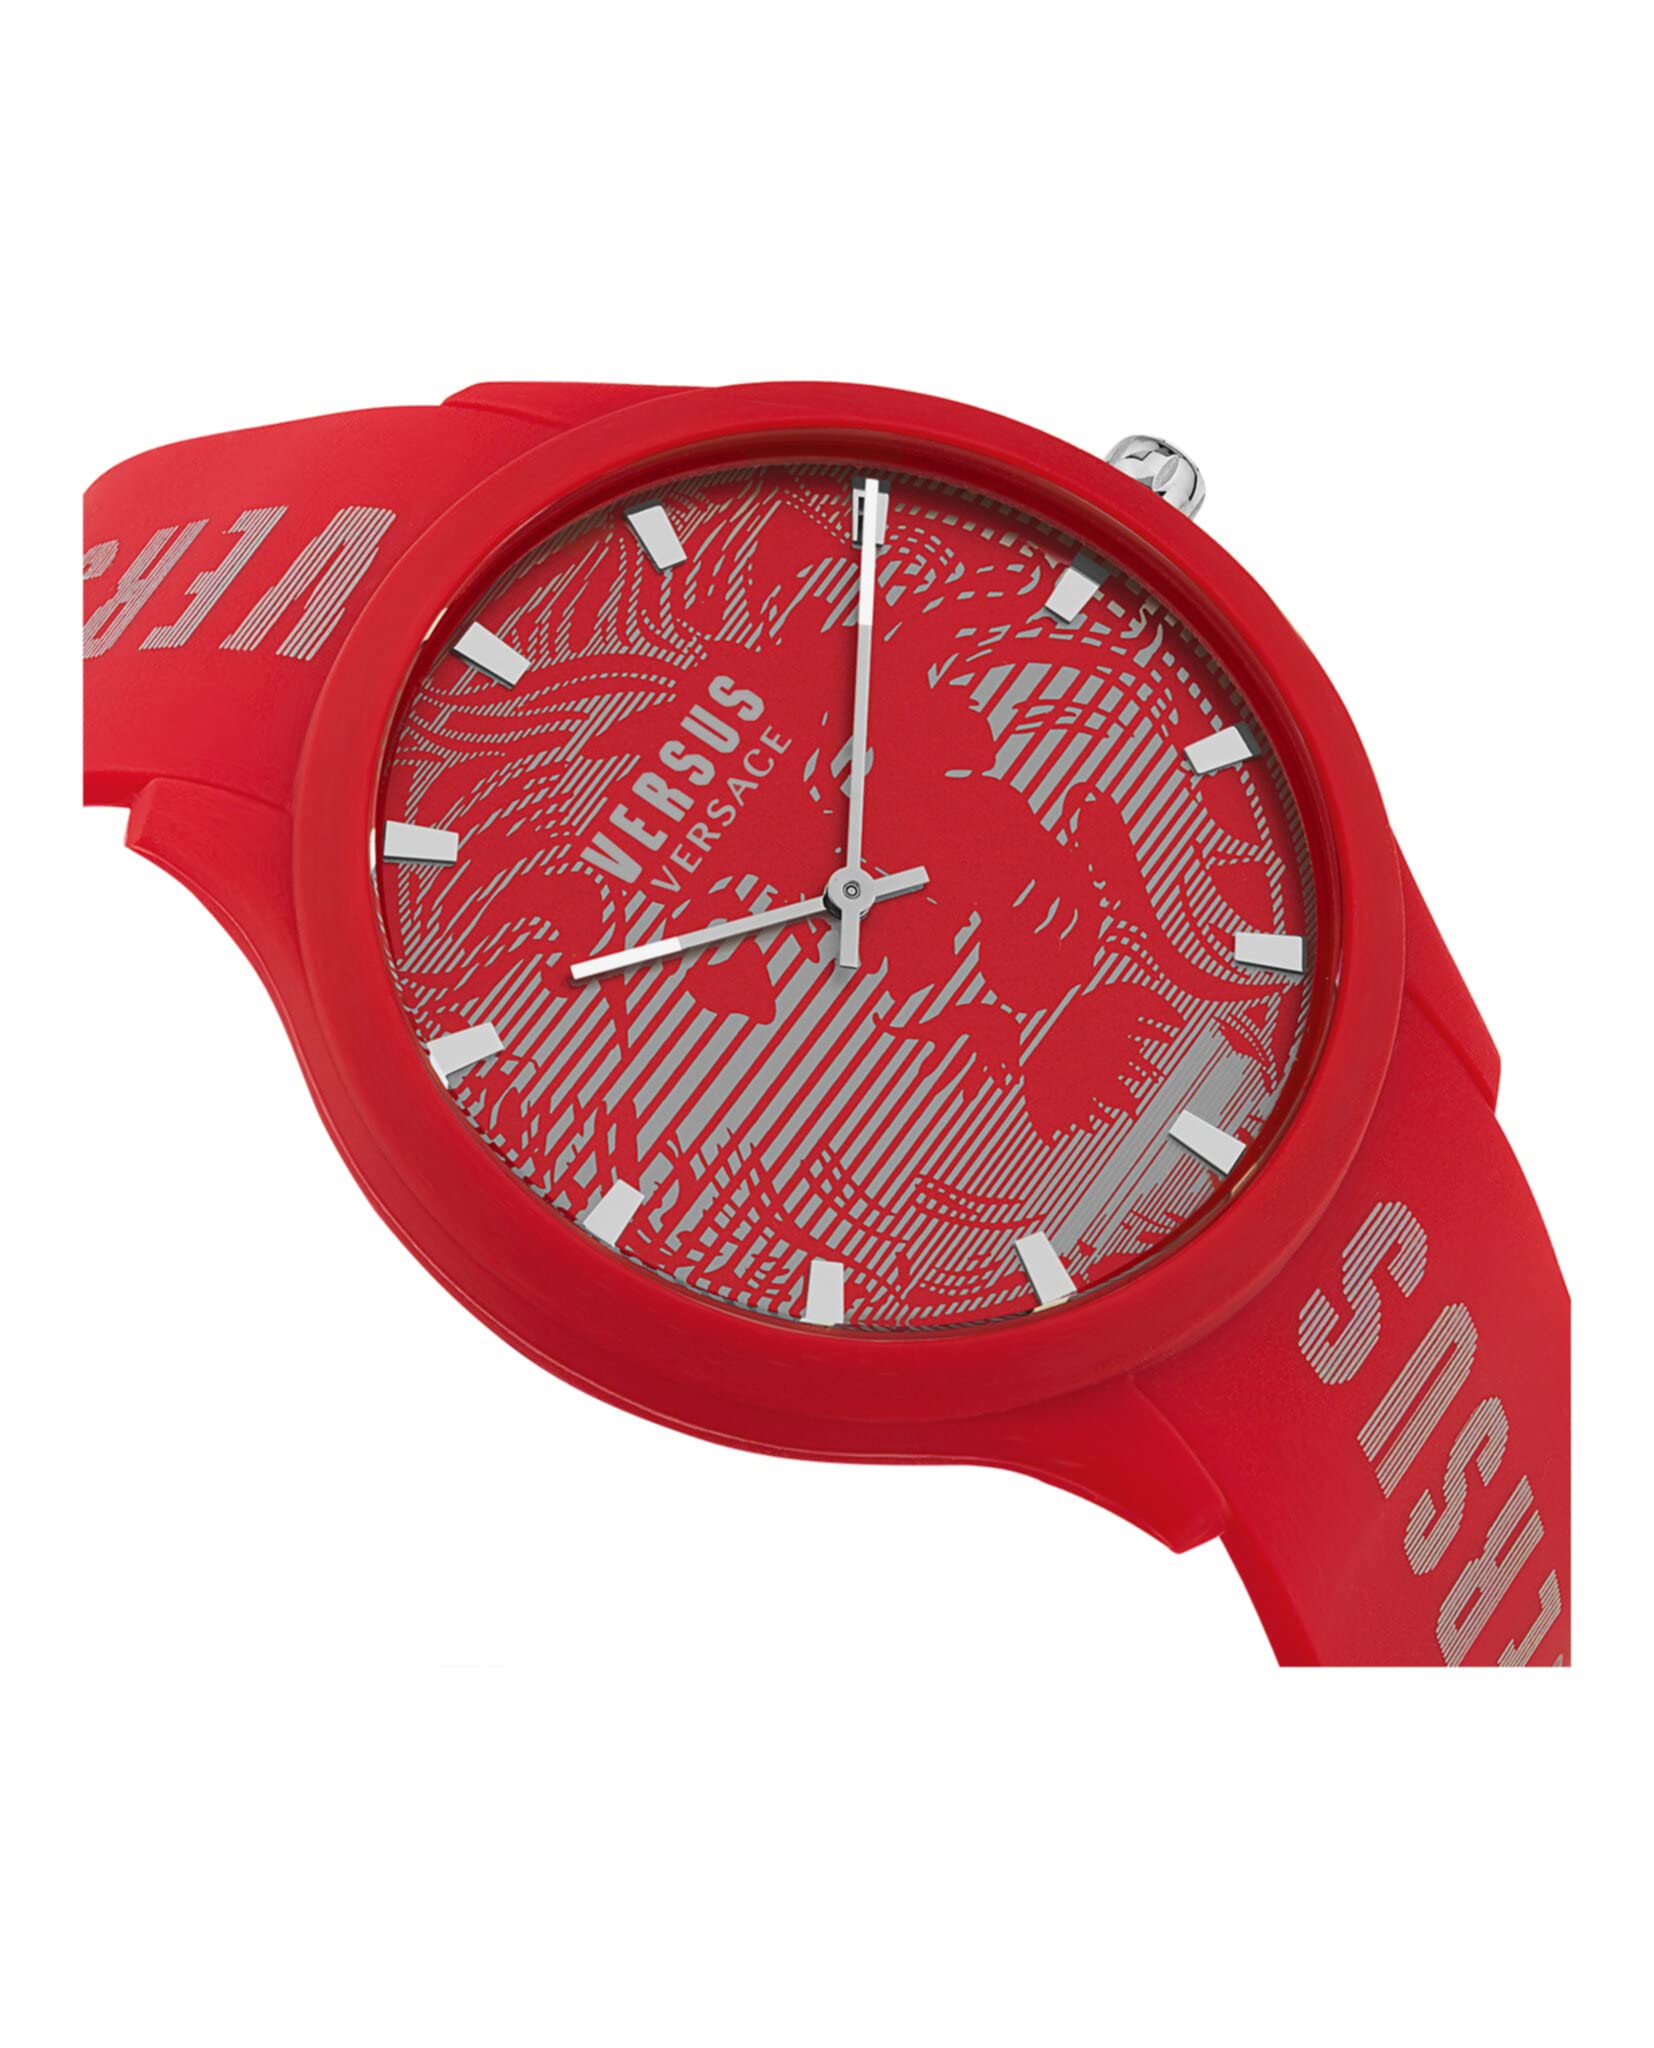 Versus Versace Domus Collection Mens Watch Featuring Sporty Adjustable Silicone Strap